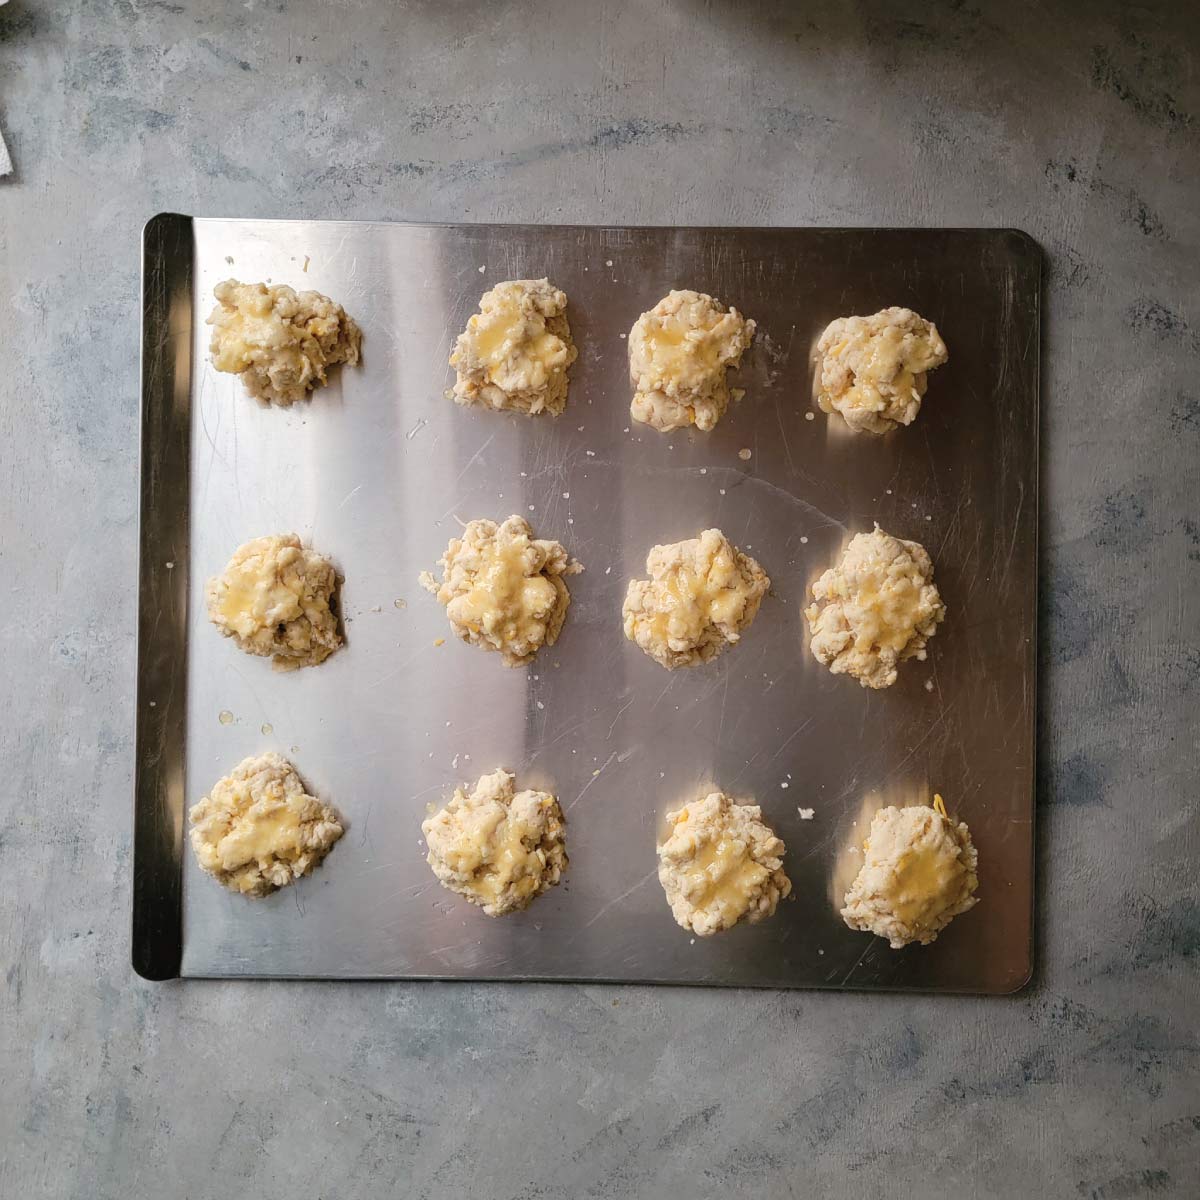 12 biscuits on a baking sheet with melted butter brushed over top just before baking.